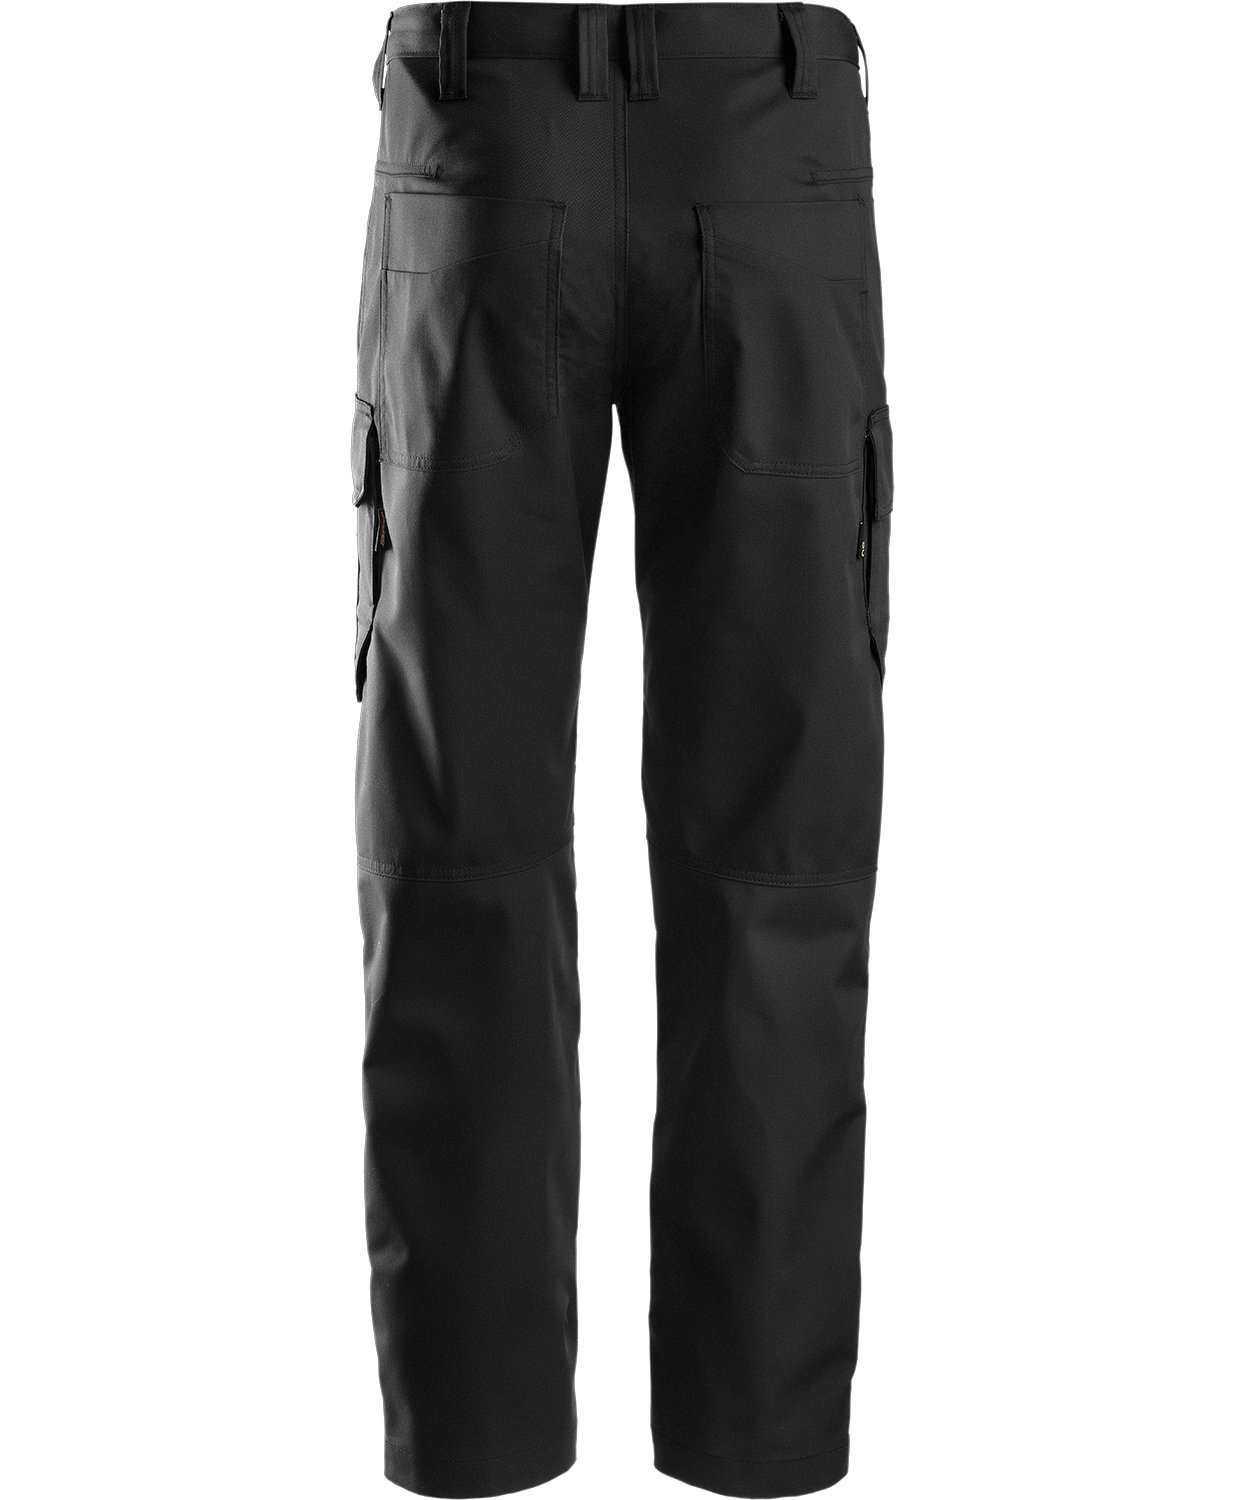 Snickers 3212 DuraTwill Craftsmen Trousers  SafetyWearSigns